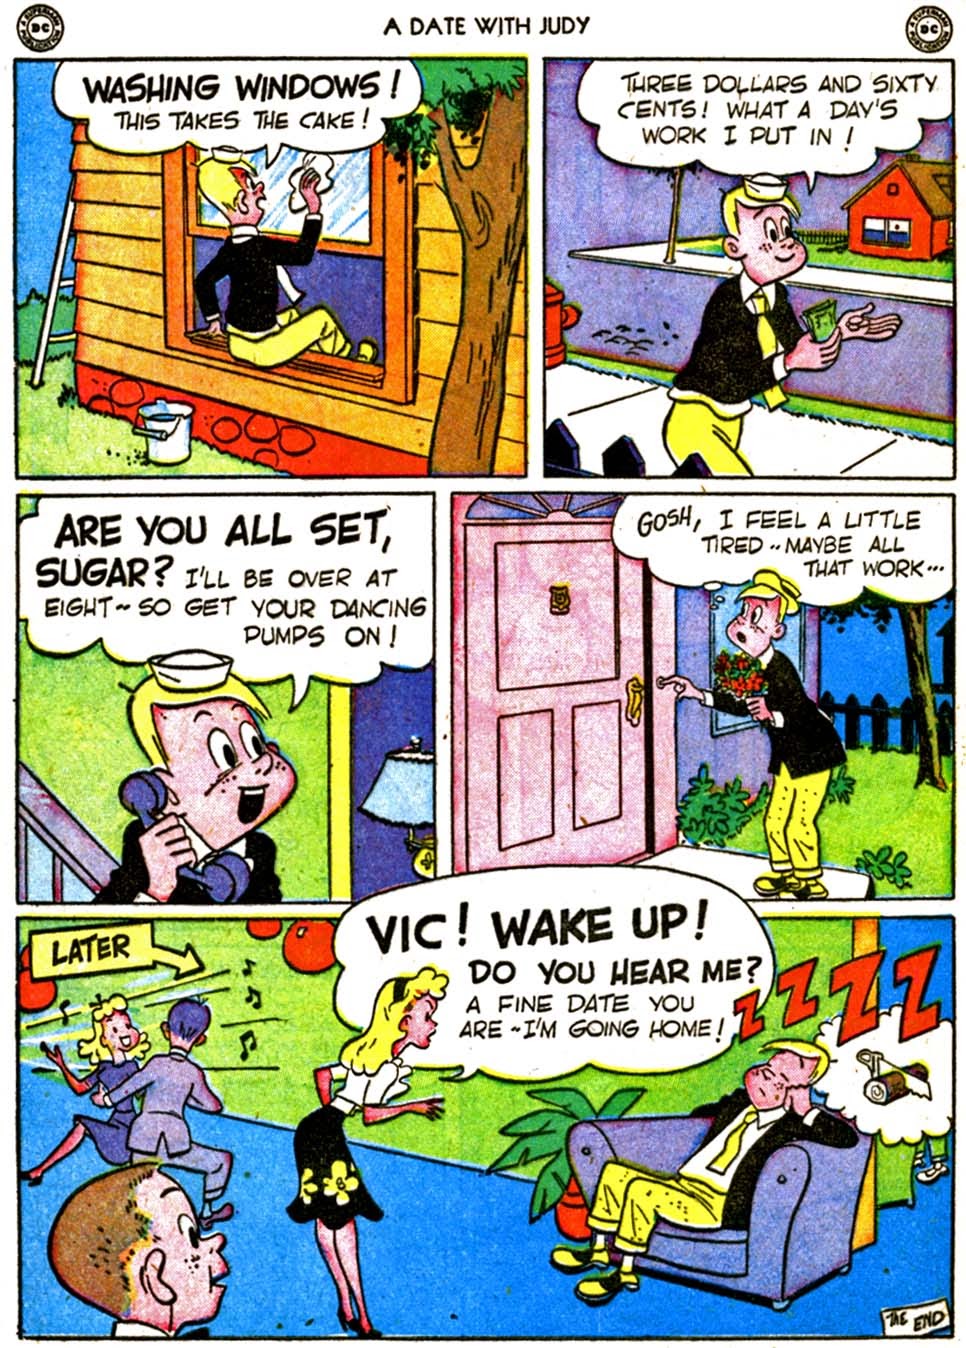 Read online A Date with Judy comic -  Issue #6 - 40